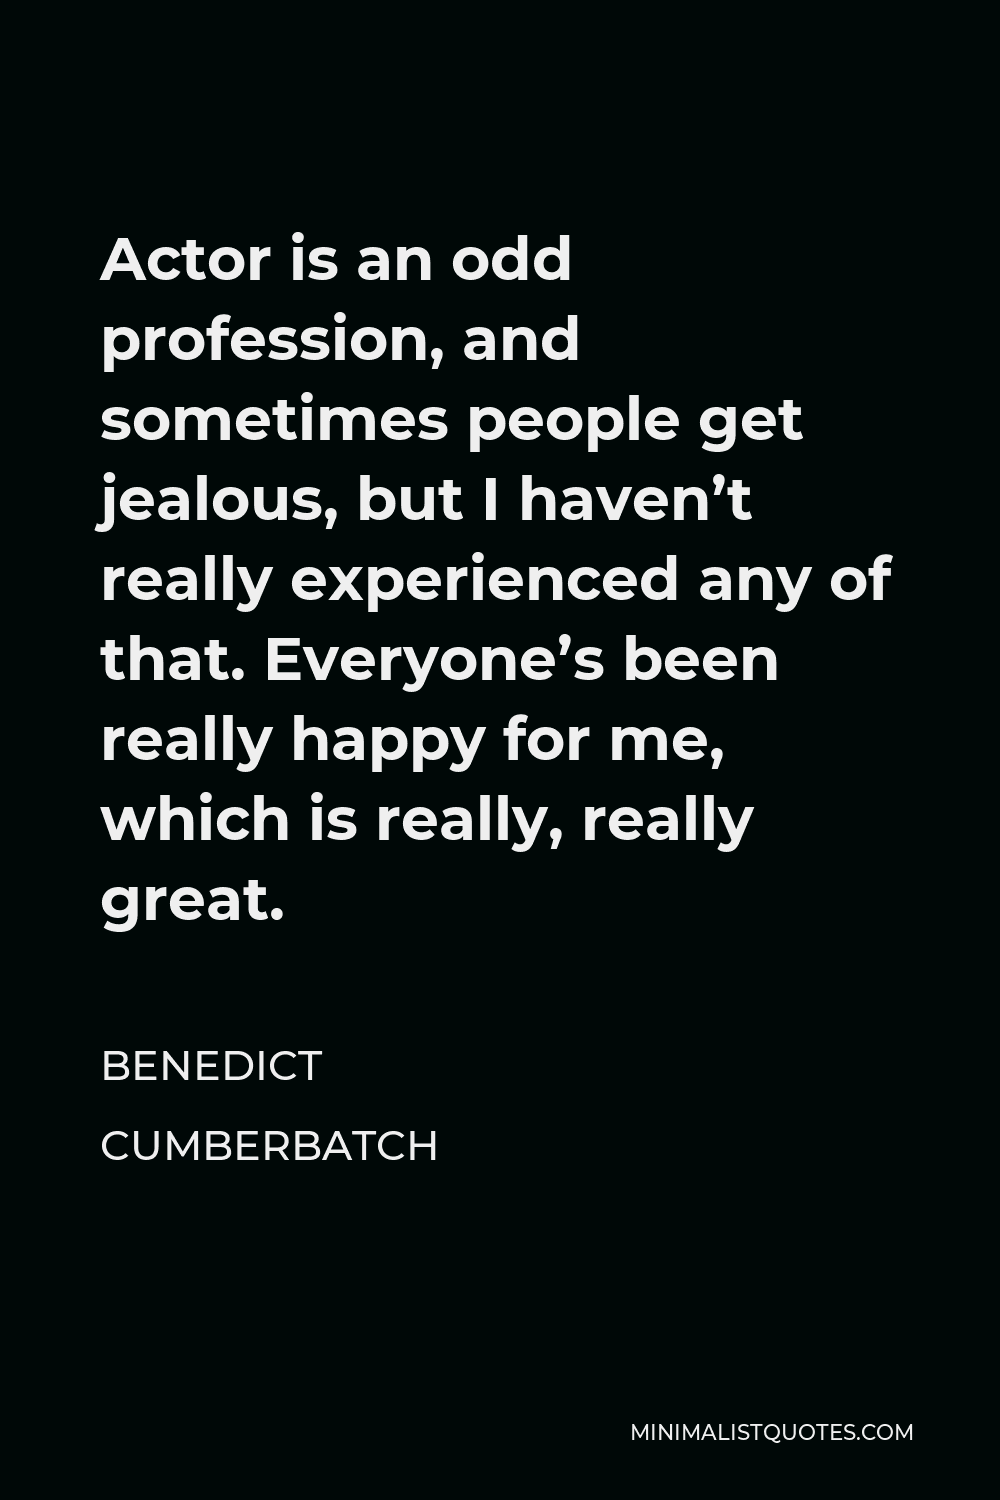 Benedict Cumberbatch Quote - Actor is an odd profession, and sometimes people get jealous, but I haven’t really experienced any of that. Everyone’s been really happy for me, which is really, really great.